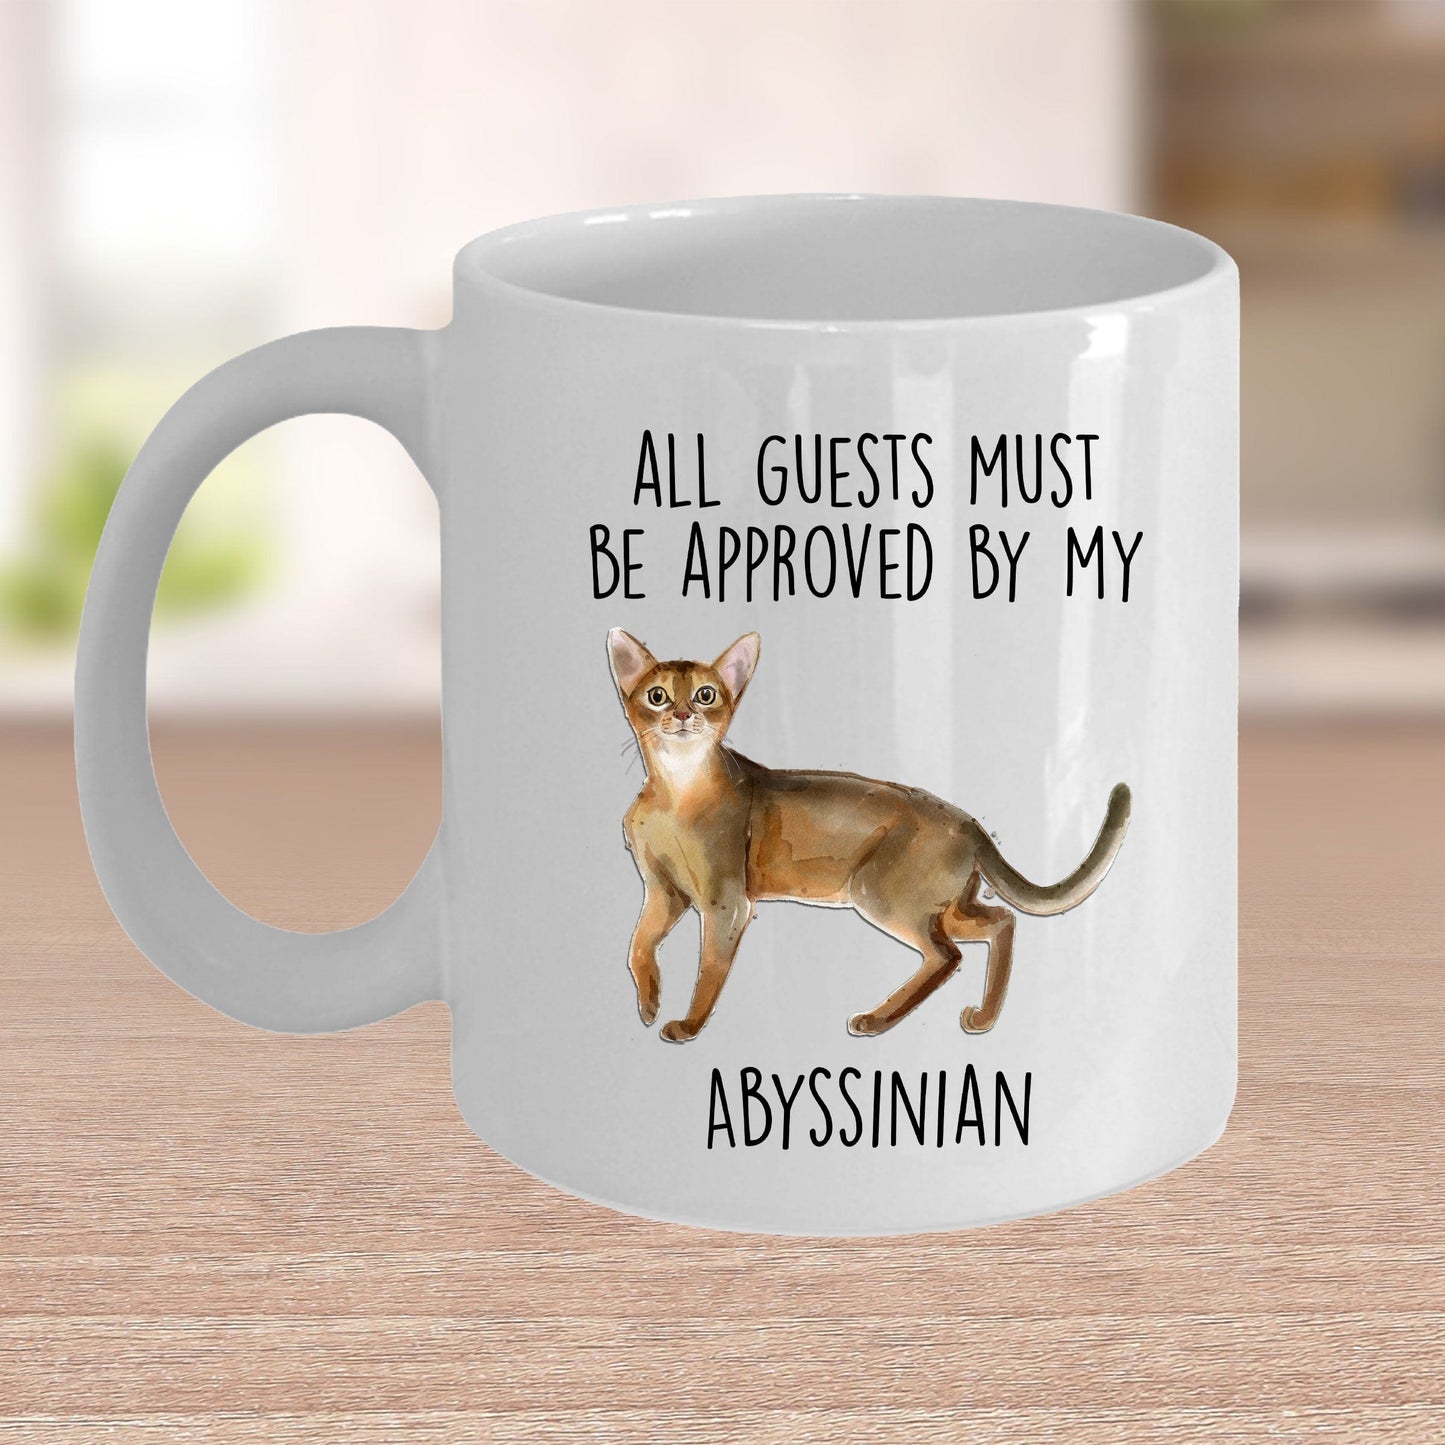 Abyssinian Cat Funny Coffee Mug - All Guests Must Be Approved